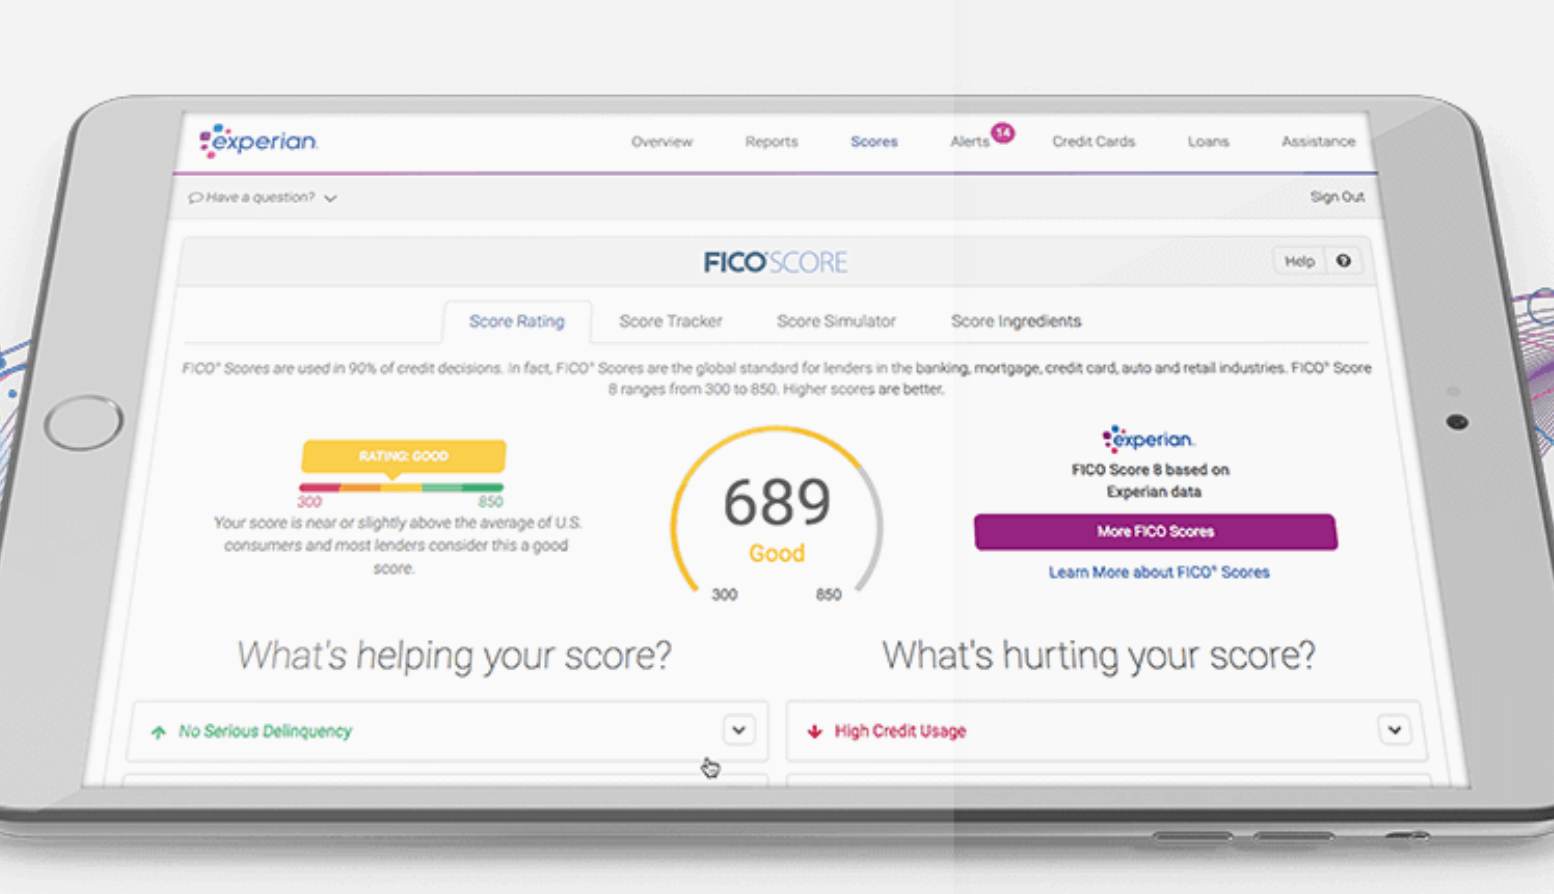 EXPERIAN LOGIN FOR FREE CREDIT REPORT AND CREDIT SCORE